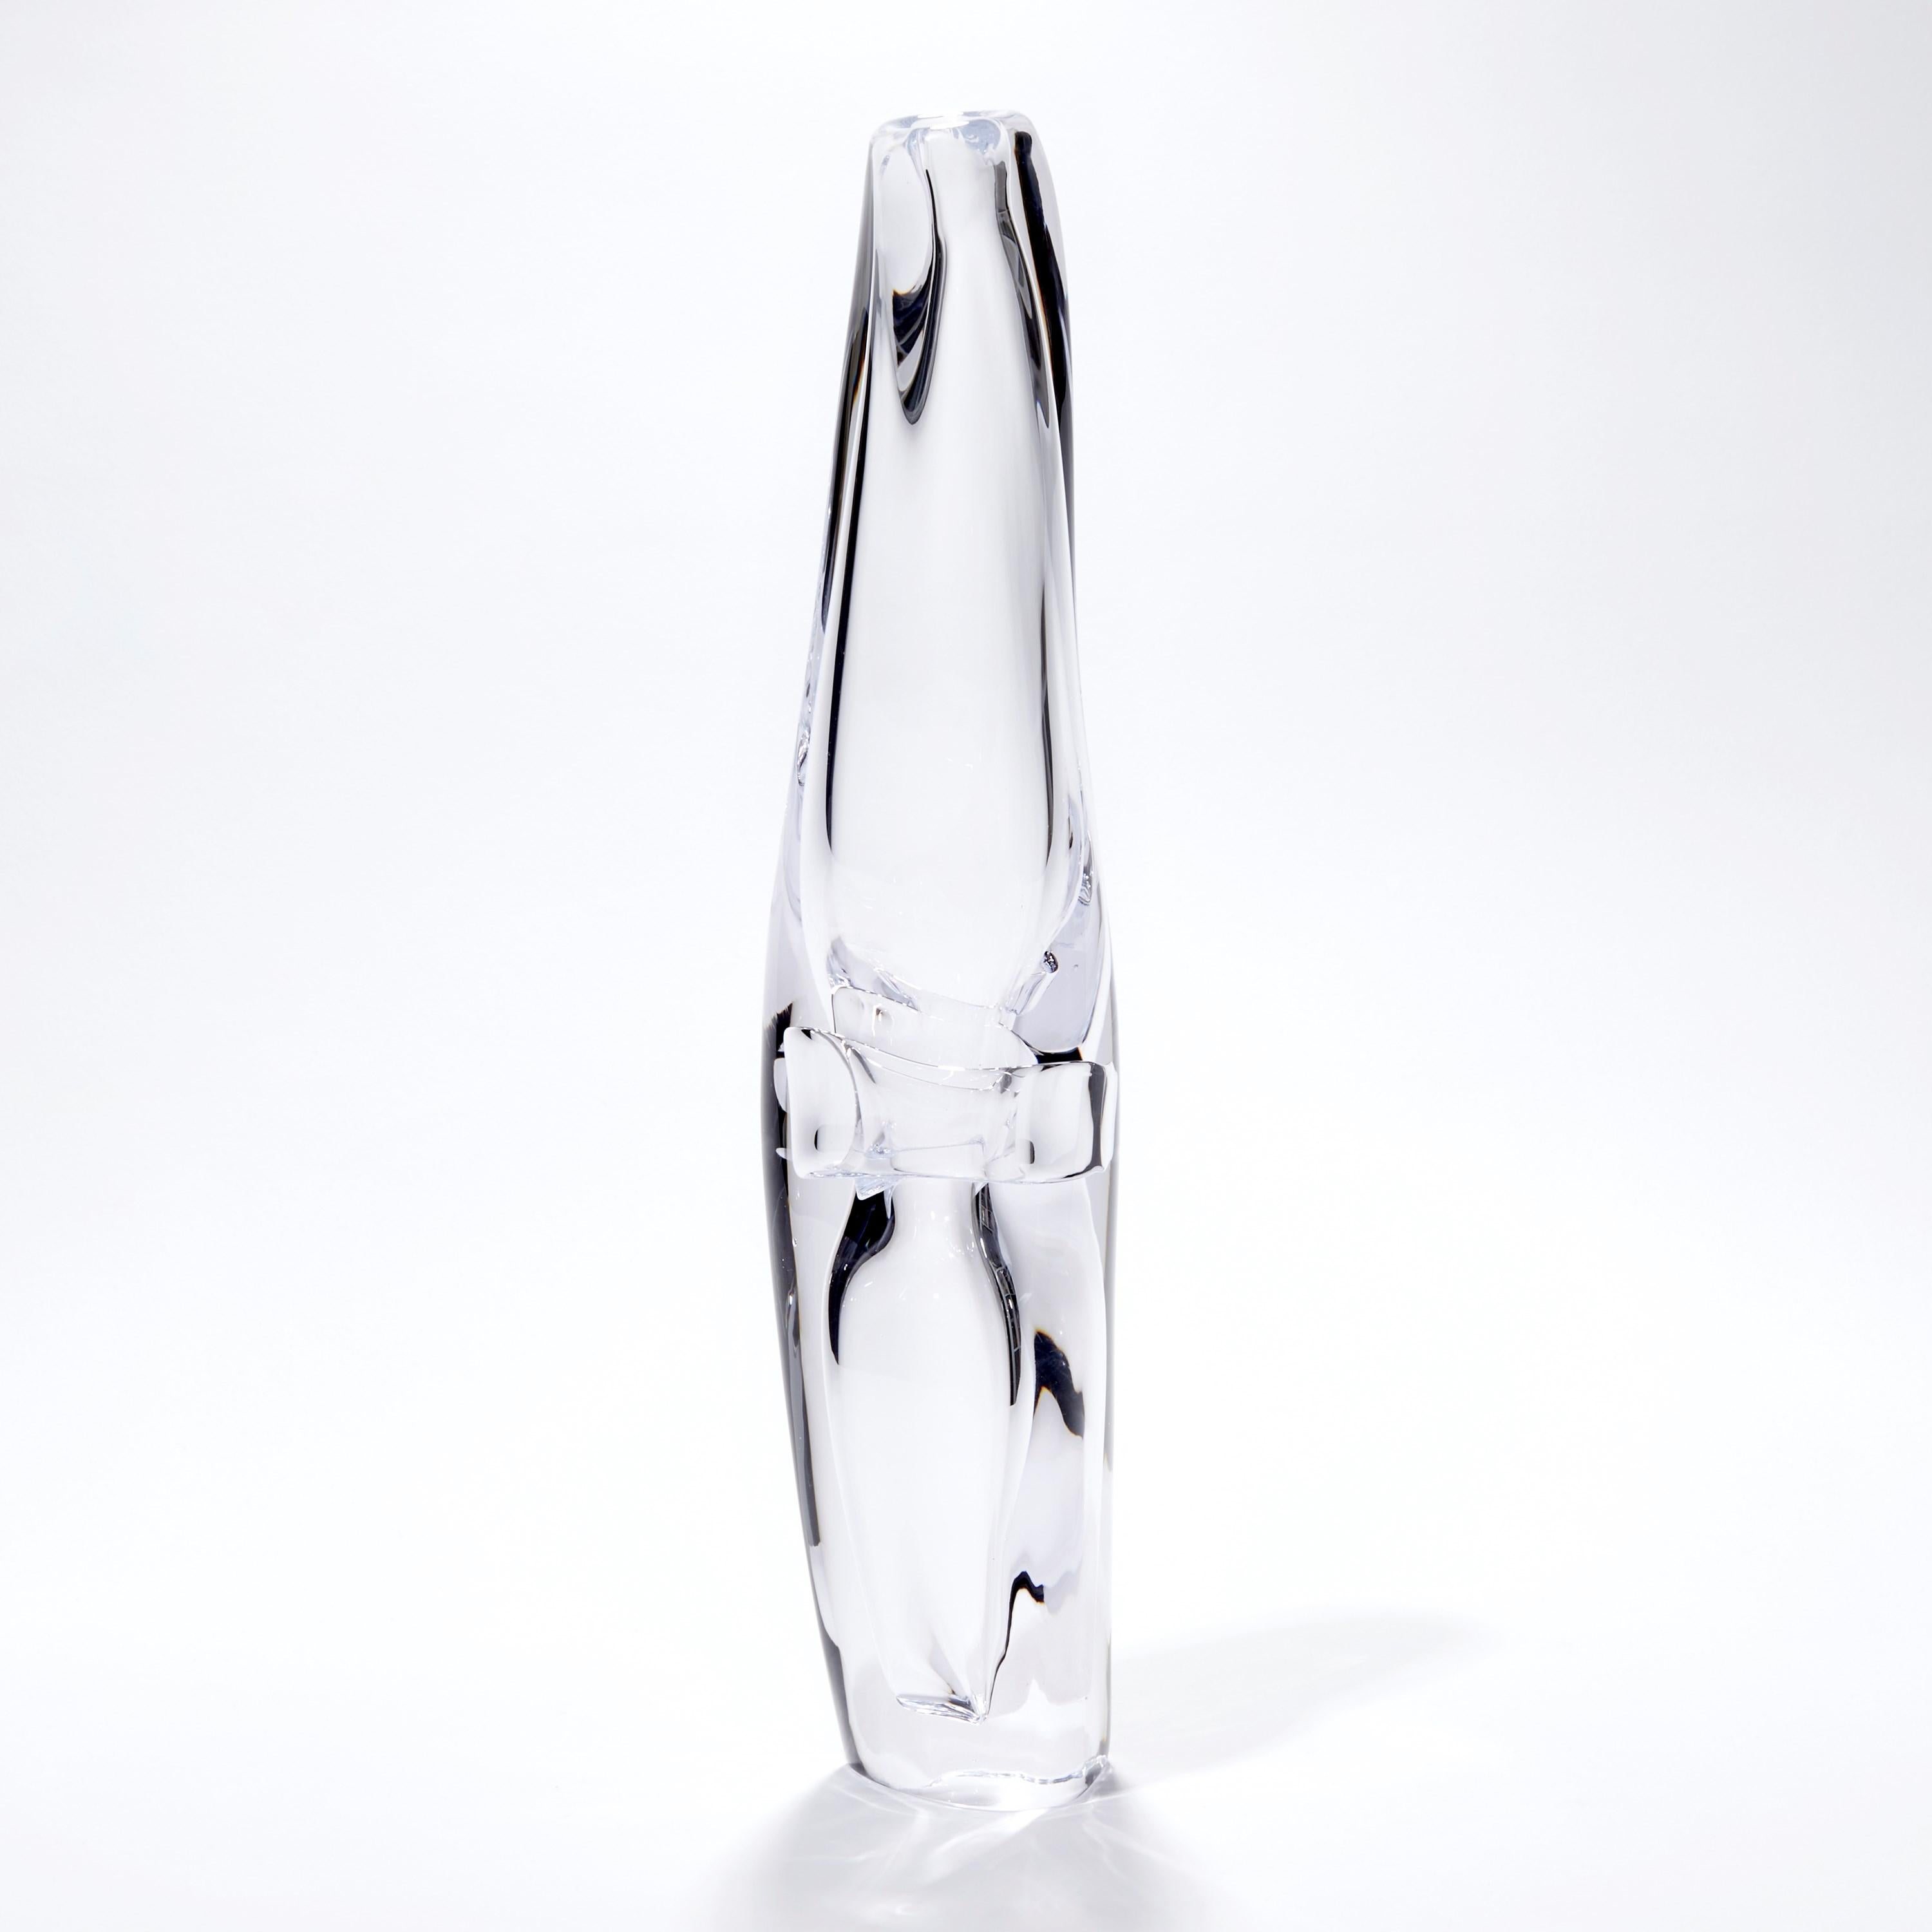 'Sommarial in Clear' is a unique handblown sculptural glass vessel by the British artist, Vic Bamforth.

Bamforth is an artist who has helped to bring the highly demanding graal technique into the 21st century. He combines hand-painting and glass